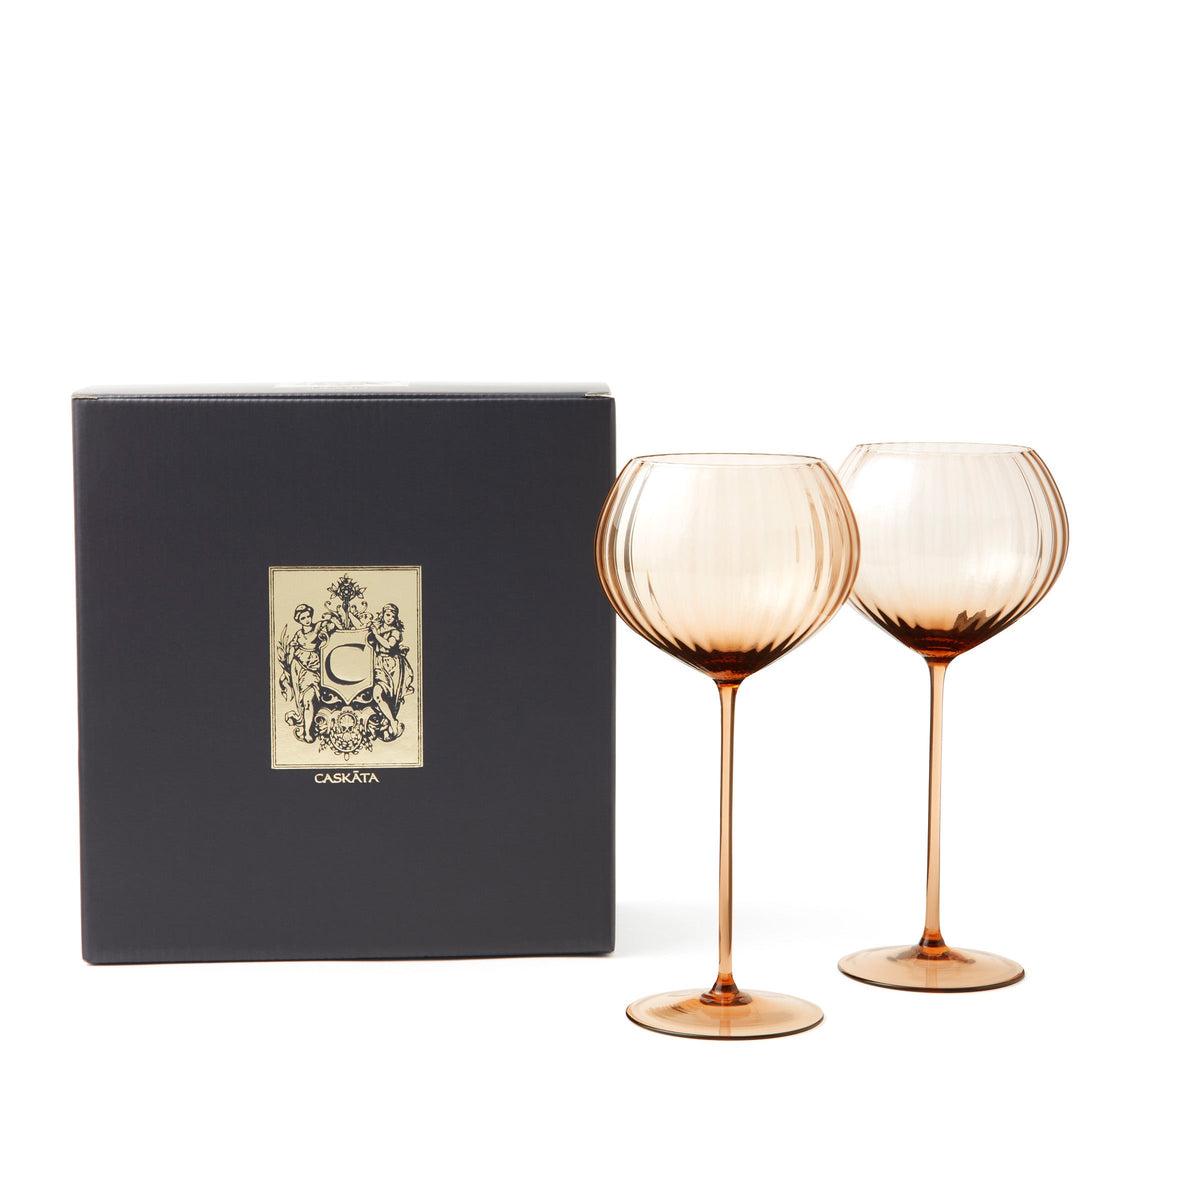 Set of 2 Quinn Amber Red Wine Glasses from Caskata, with a black and gold gift box.